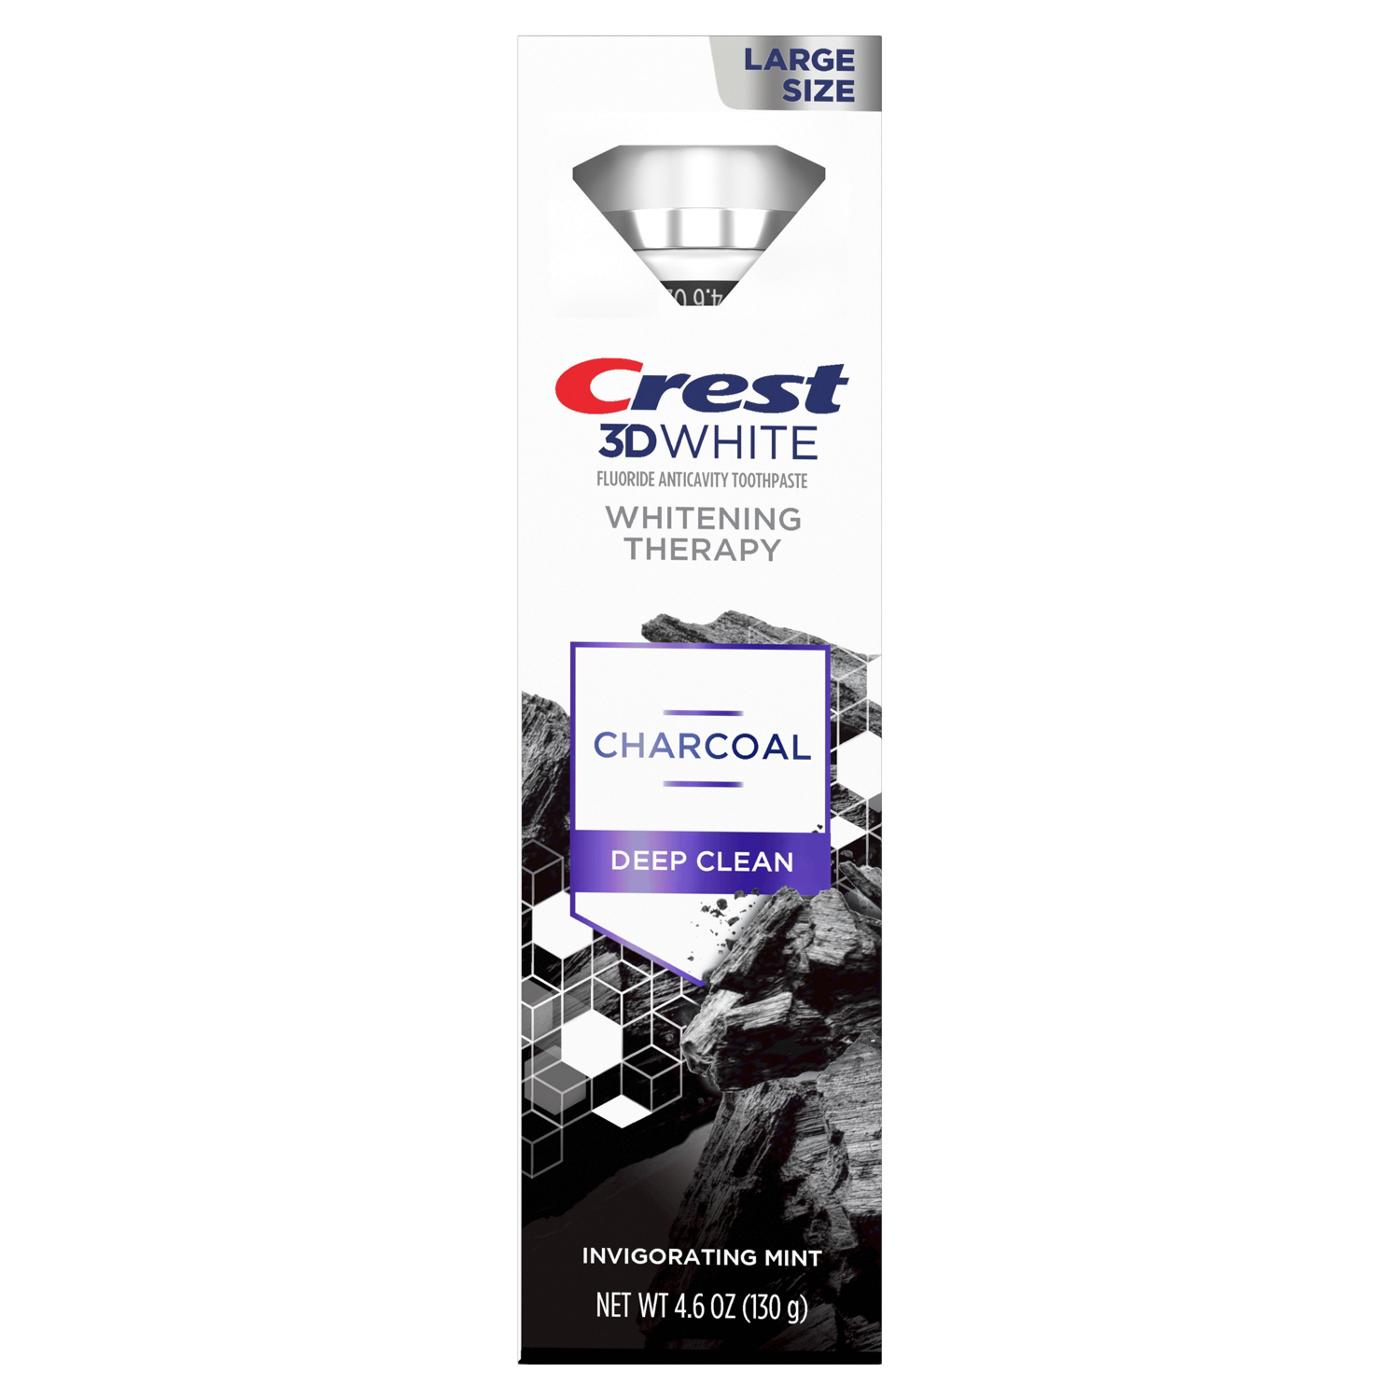 Crest 3D White Whitening Therapy Charcoal Toothpaste - Deep Clean; image 2 of 8